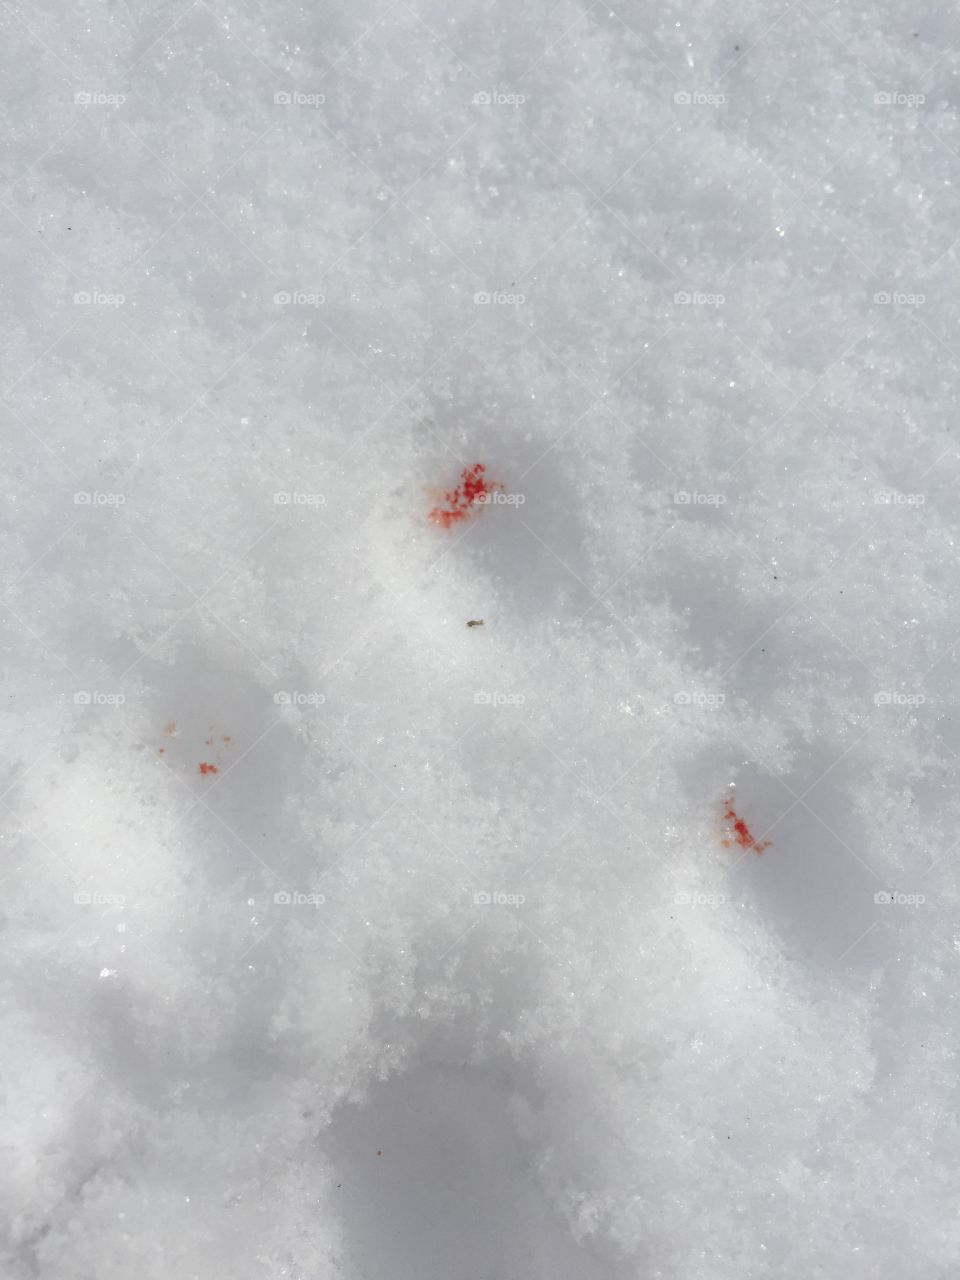 Blood in snows😂👍🏻